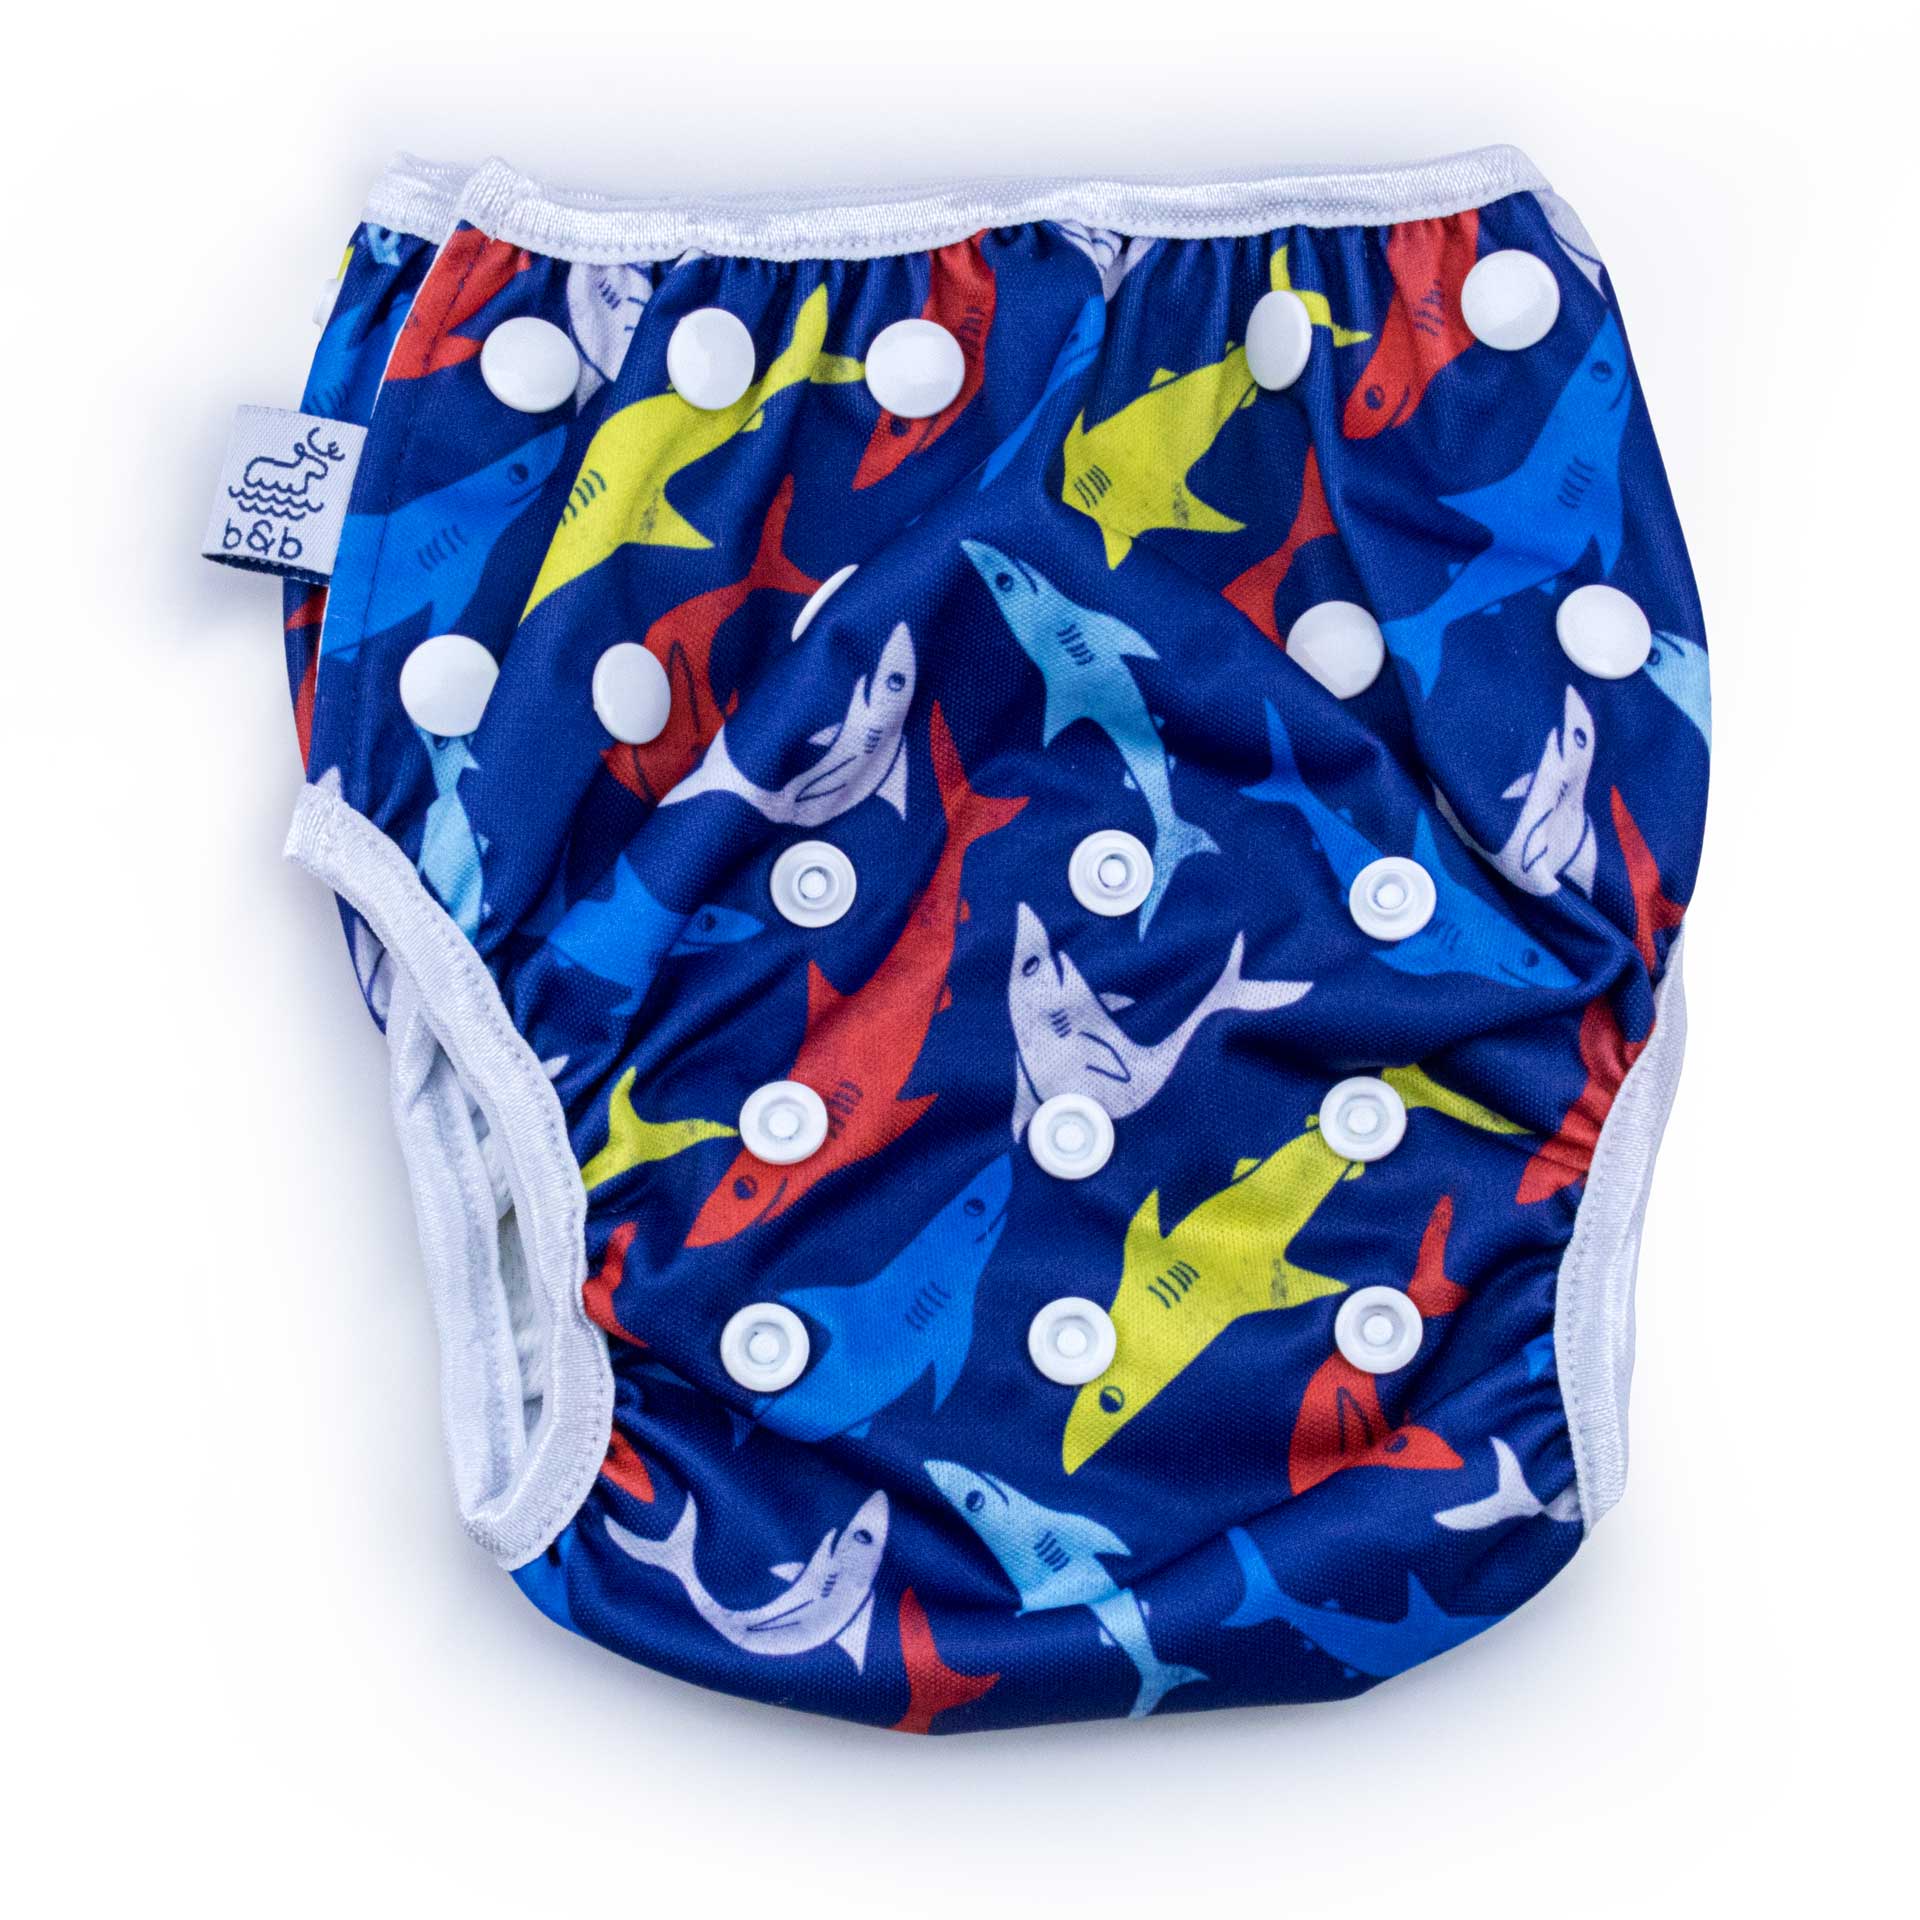 Beau and Belle Littles Swim Diaper, Regular Size, dark blue with sharks, flat lay, front view